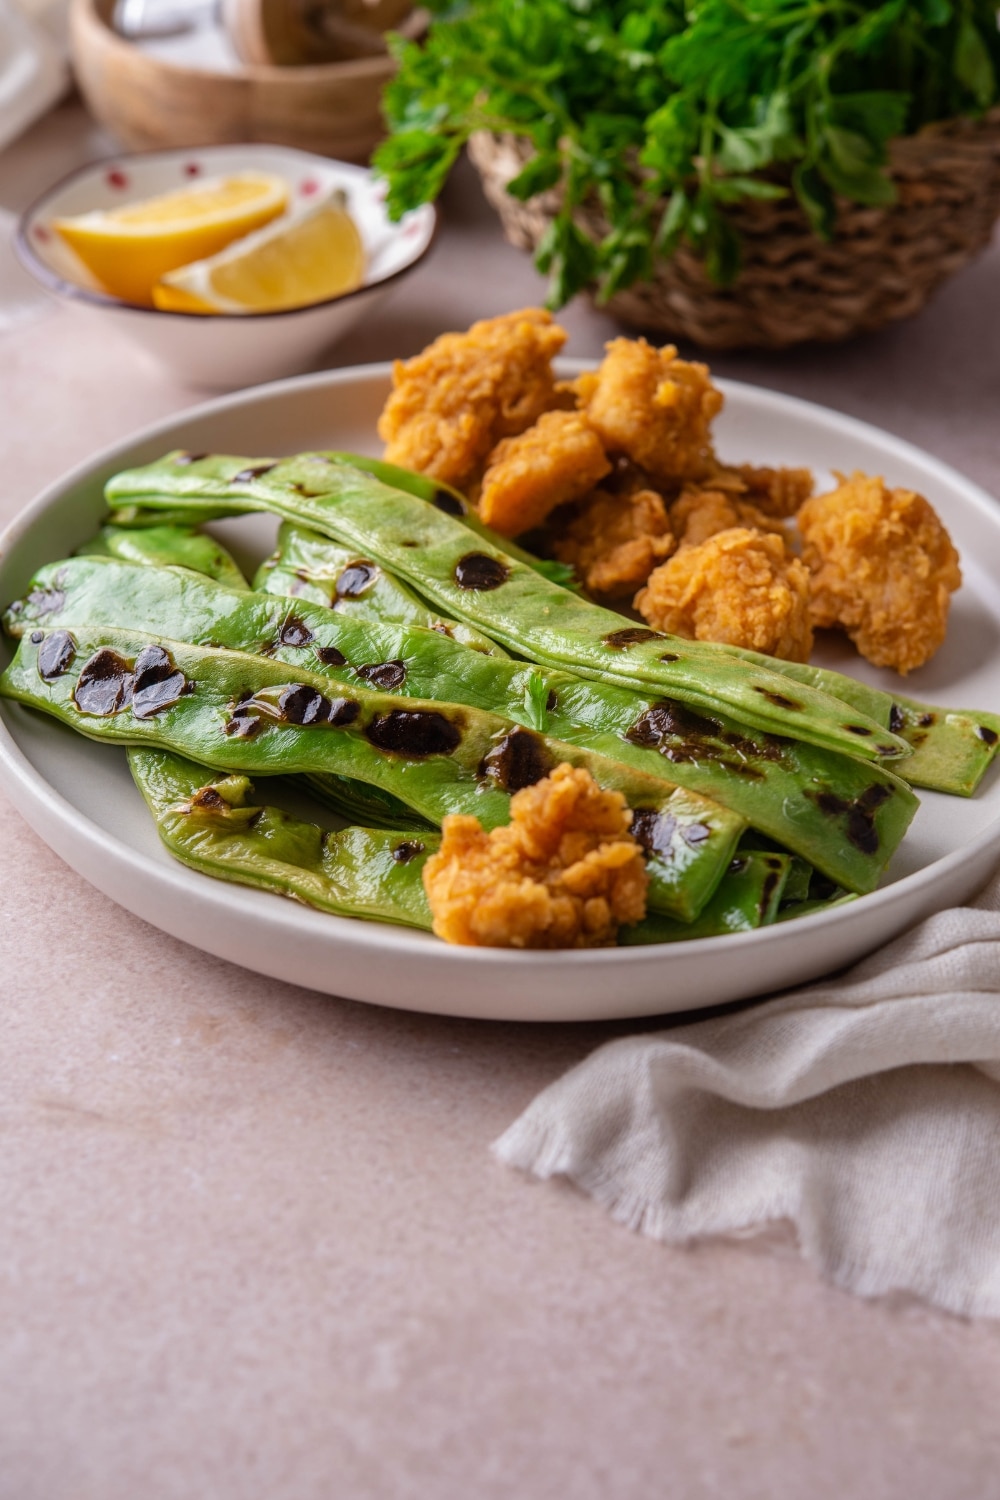 Chicken nuggets and grilled green beans on a plate, served with a small bowl of lemon wedges.